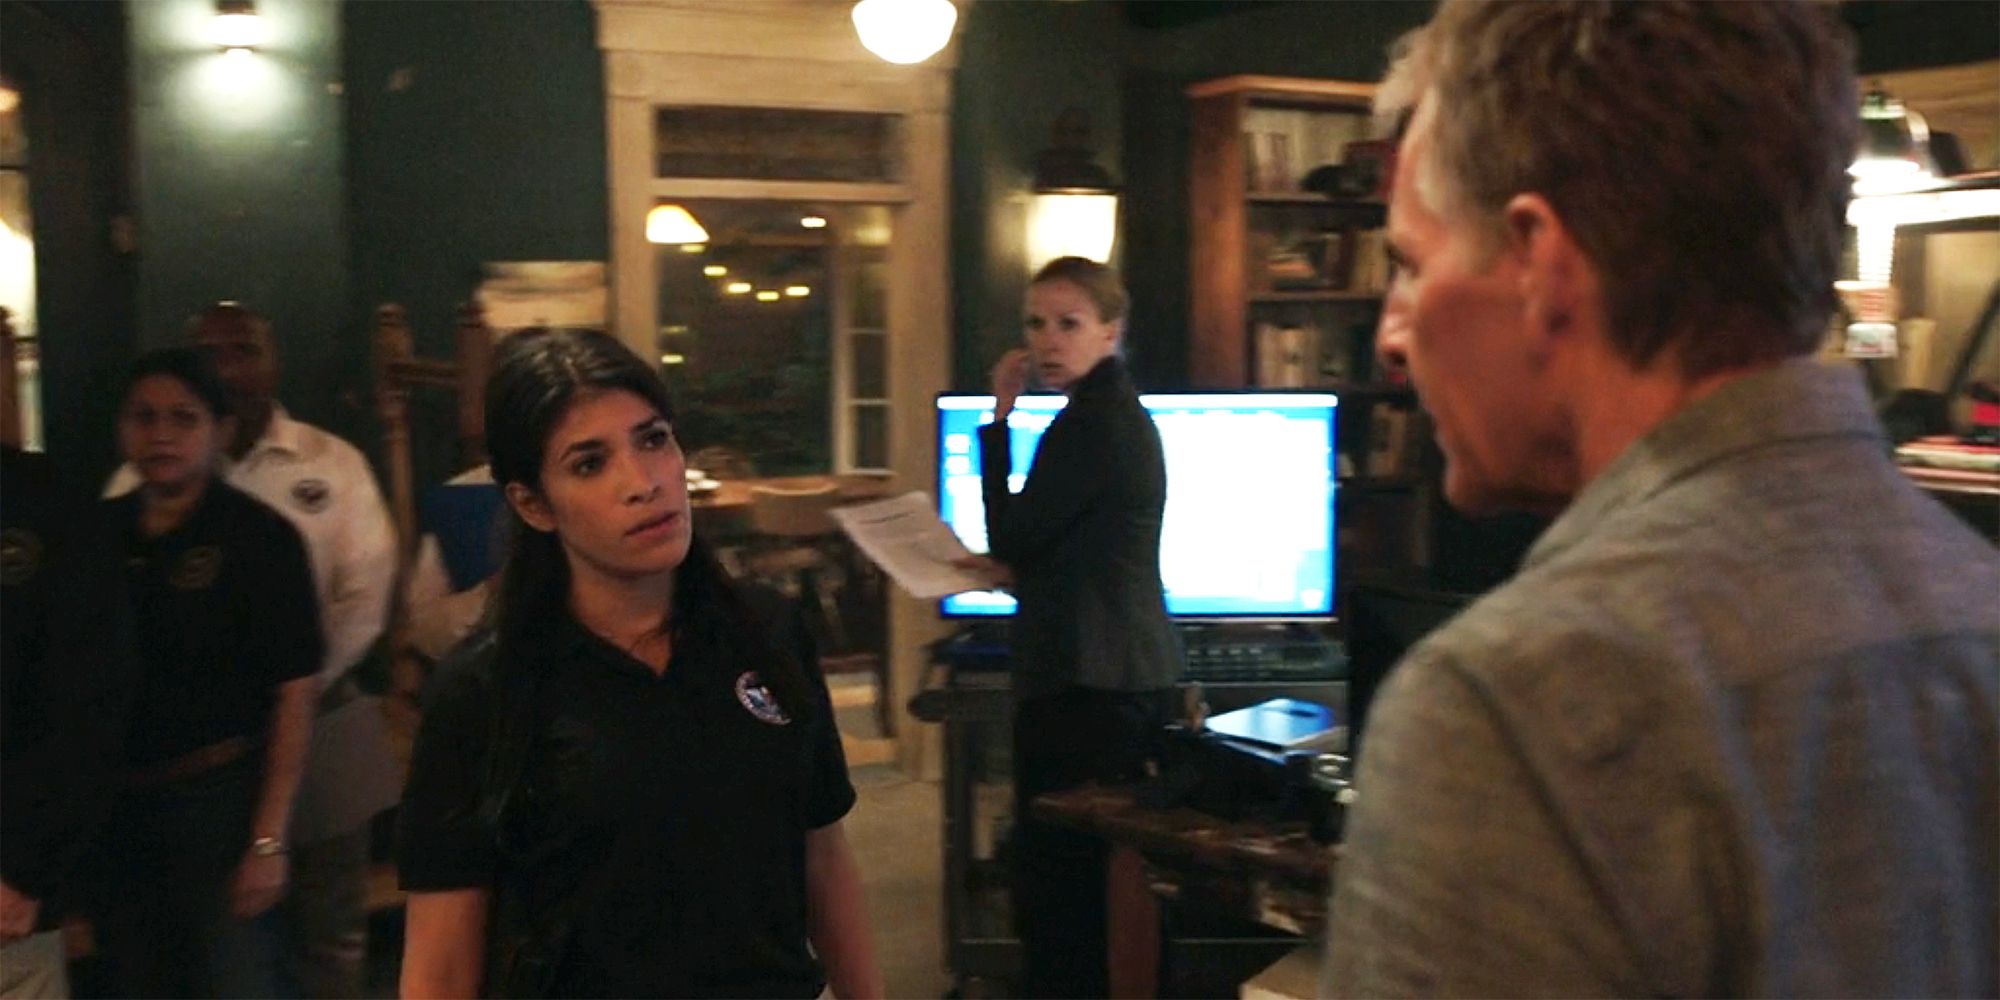 NCIS DHS Agent Garcia (Diany Rodriguez) taking orders from Dwayne Pride